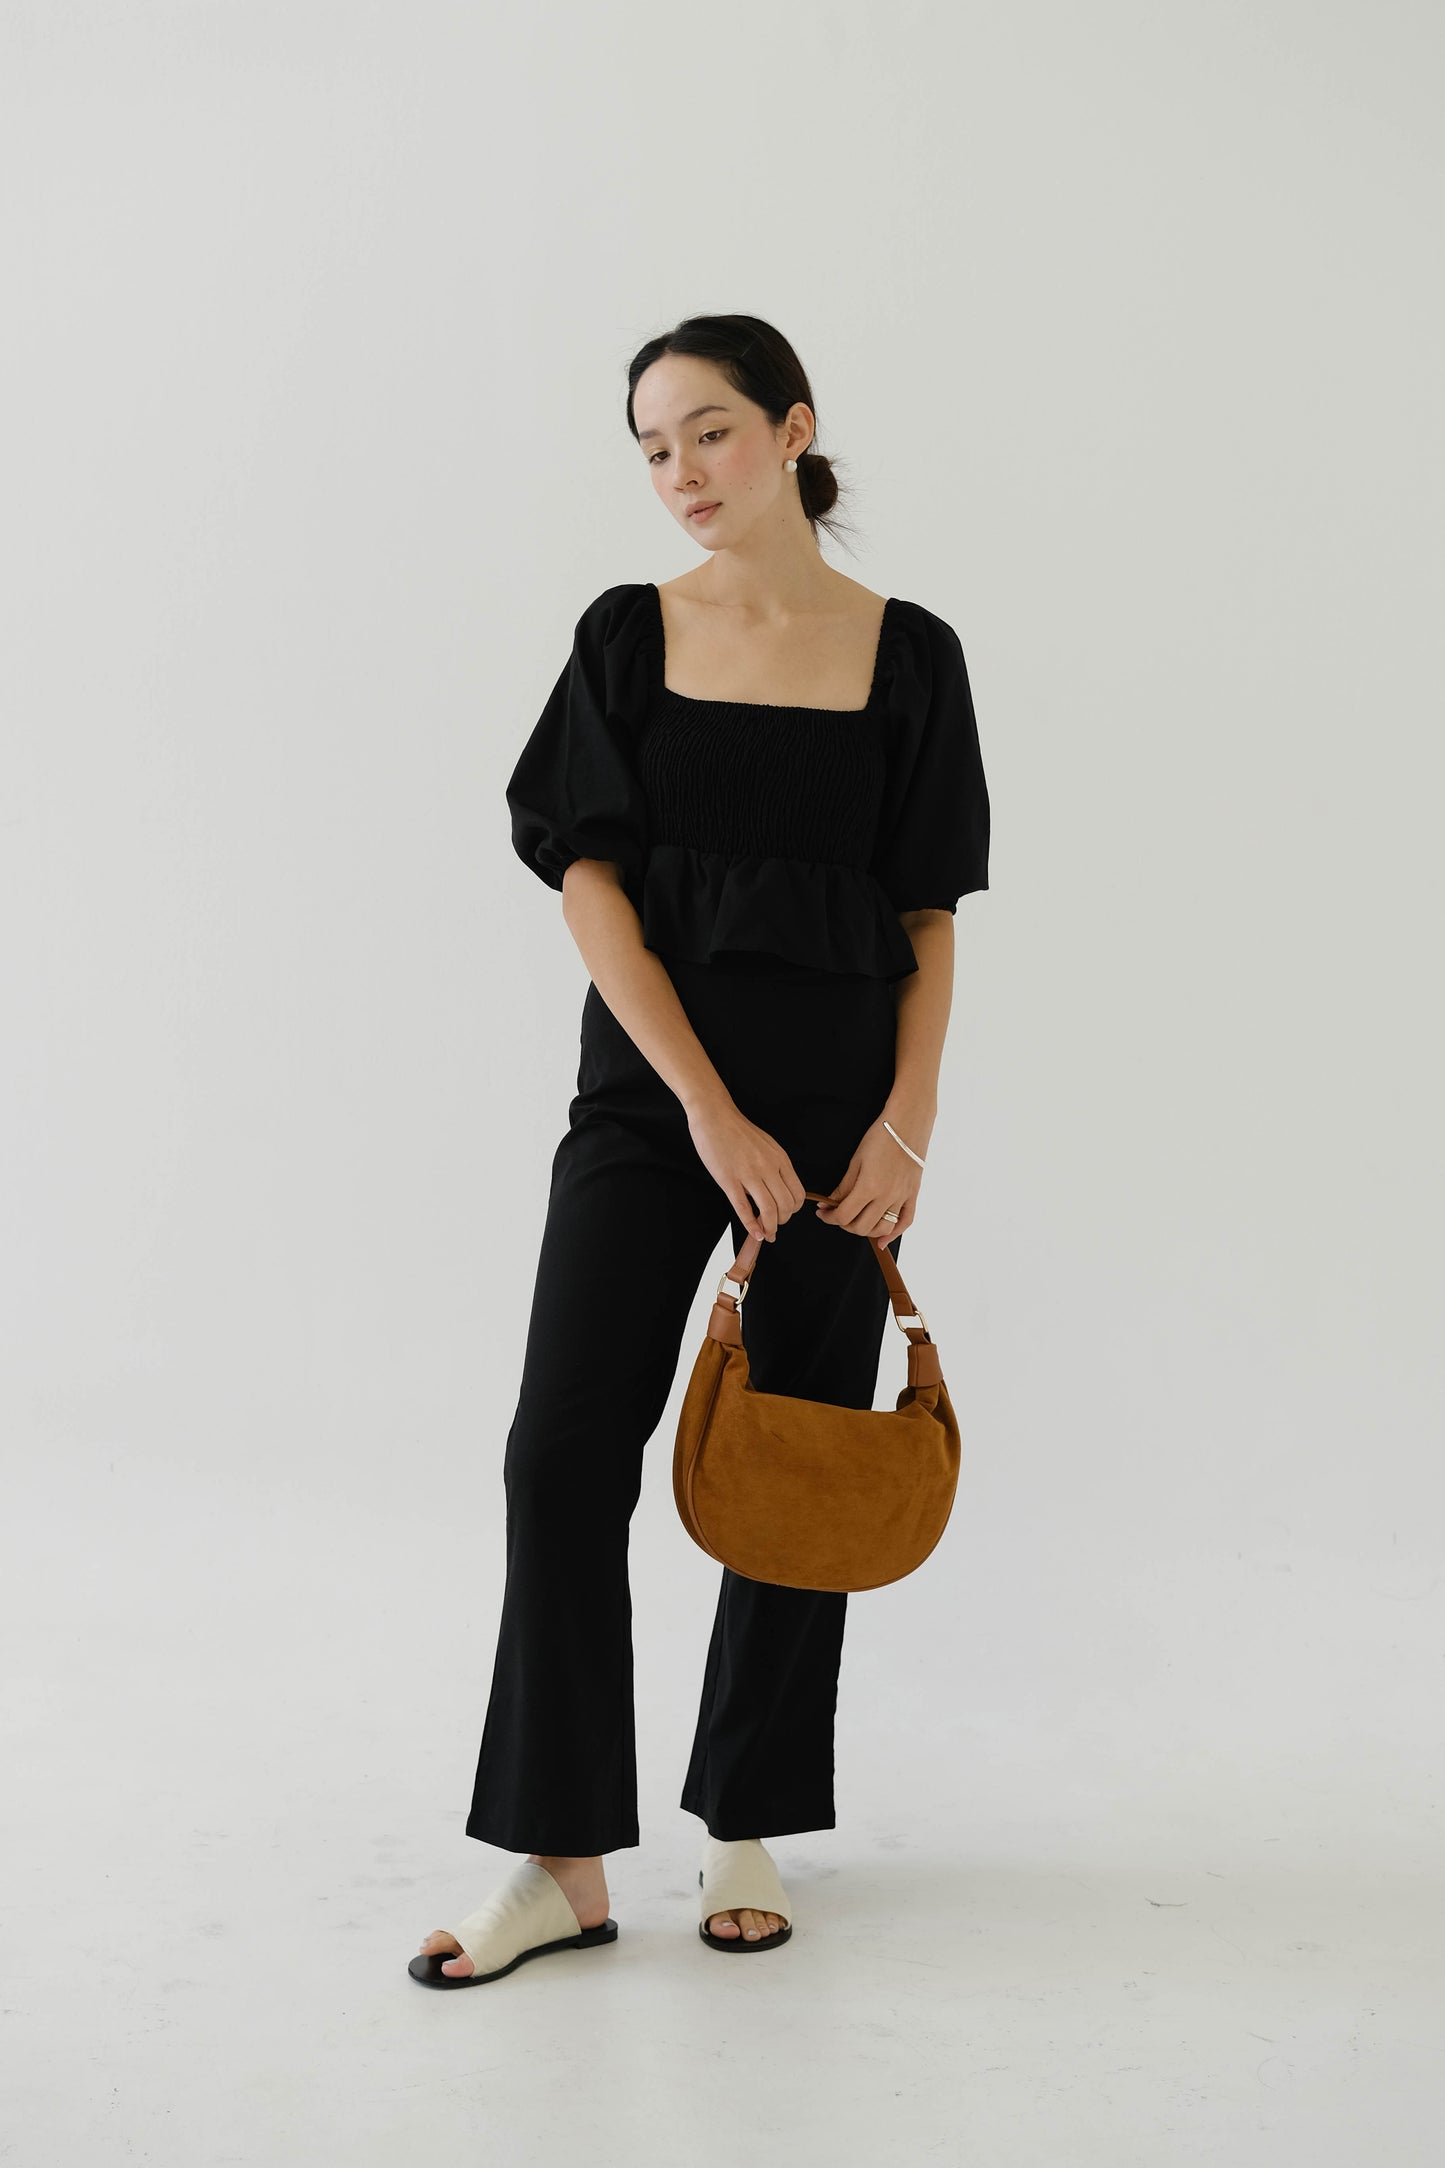 Square Neck Puff Sleeve Top + Wide Leg Pants in classic black